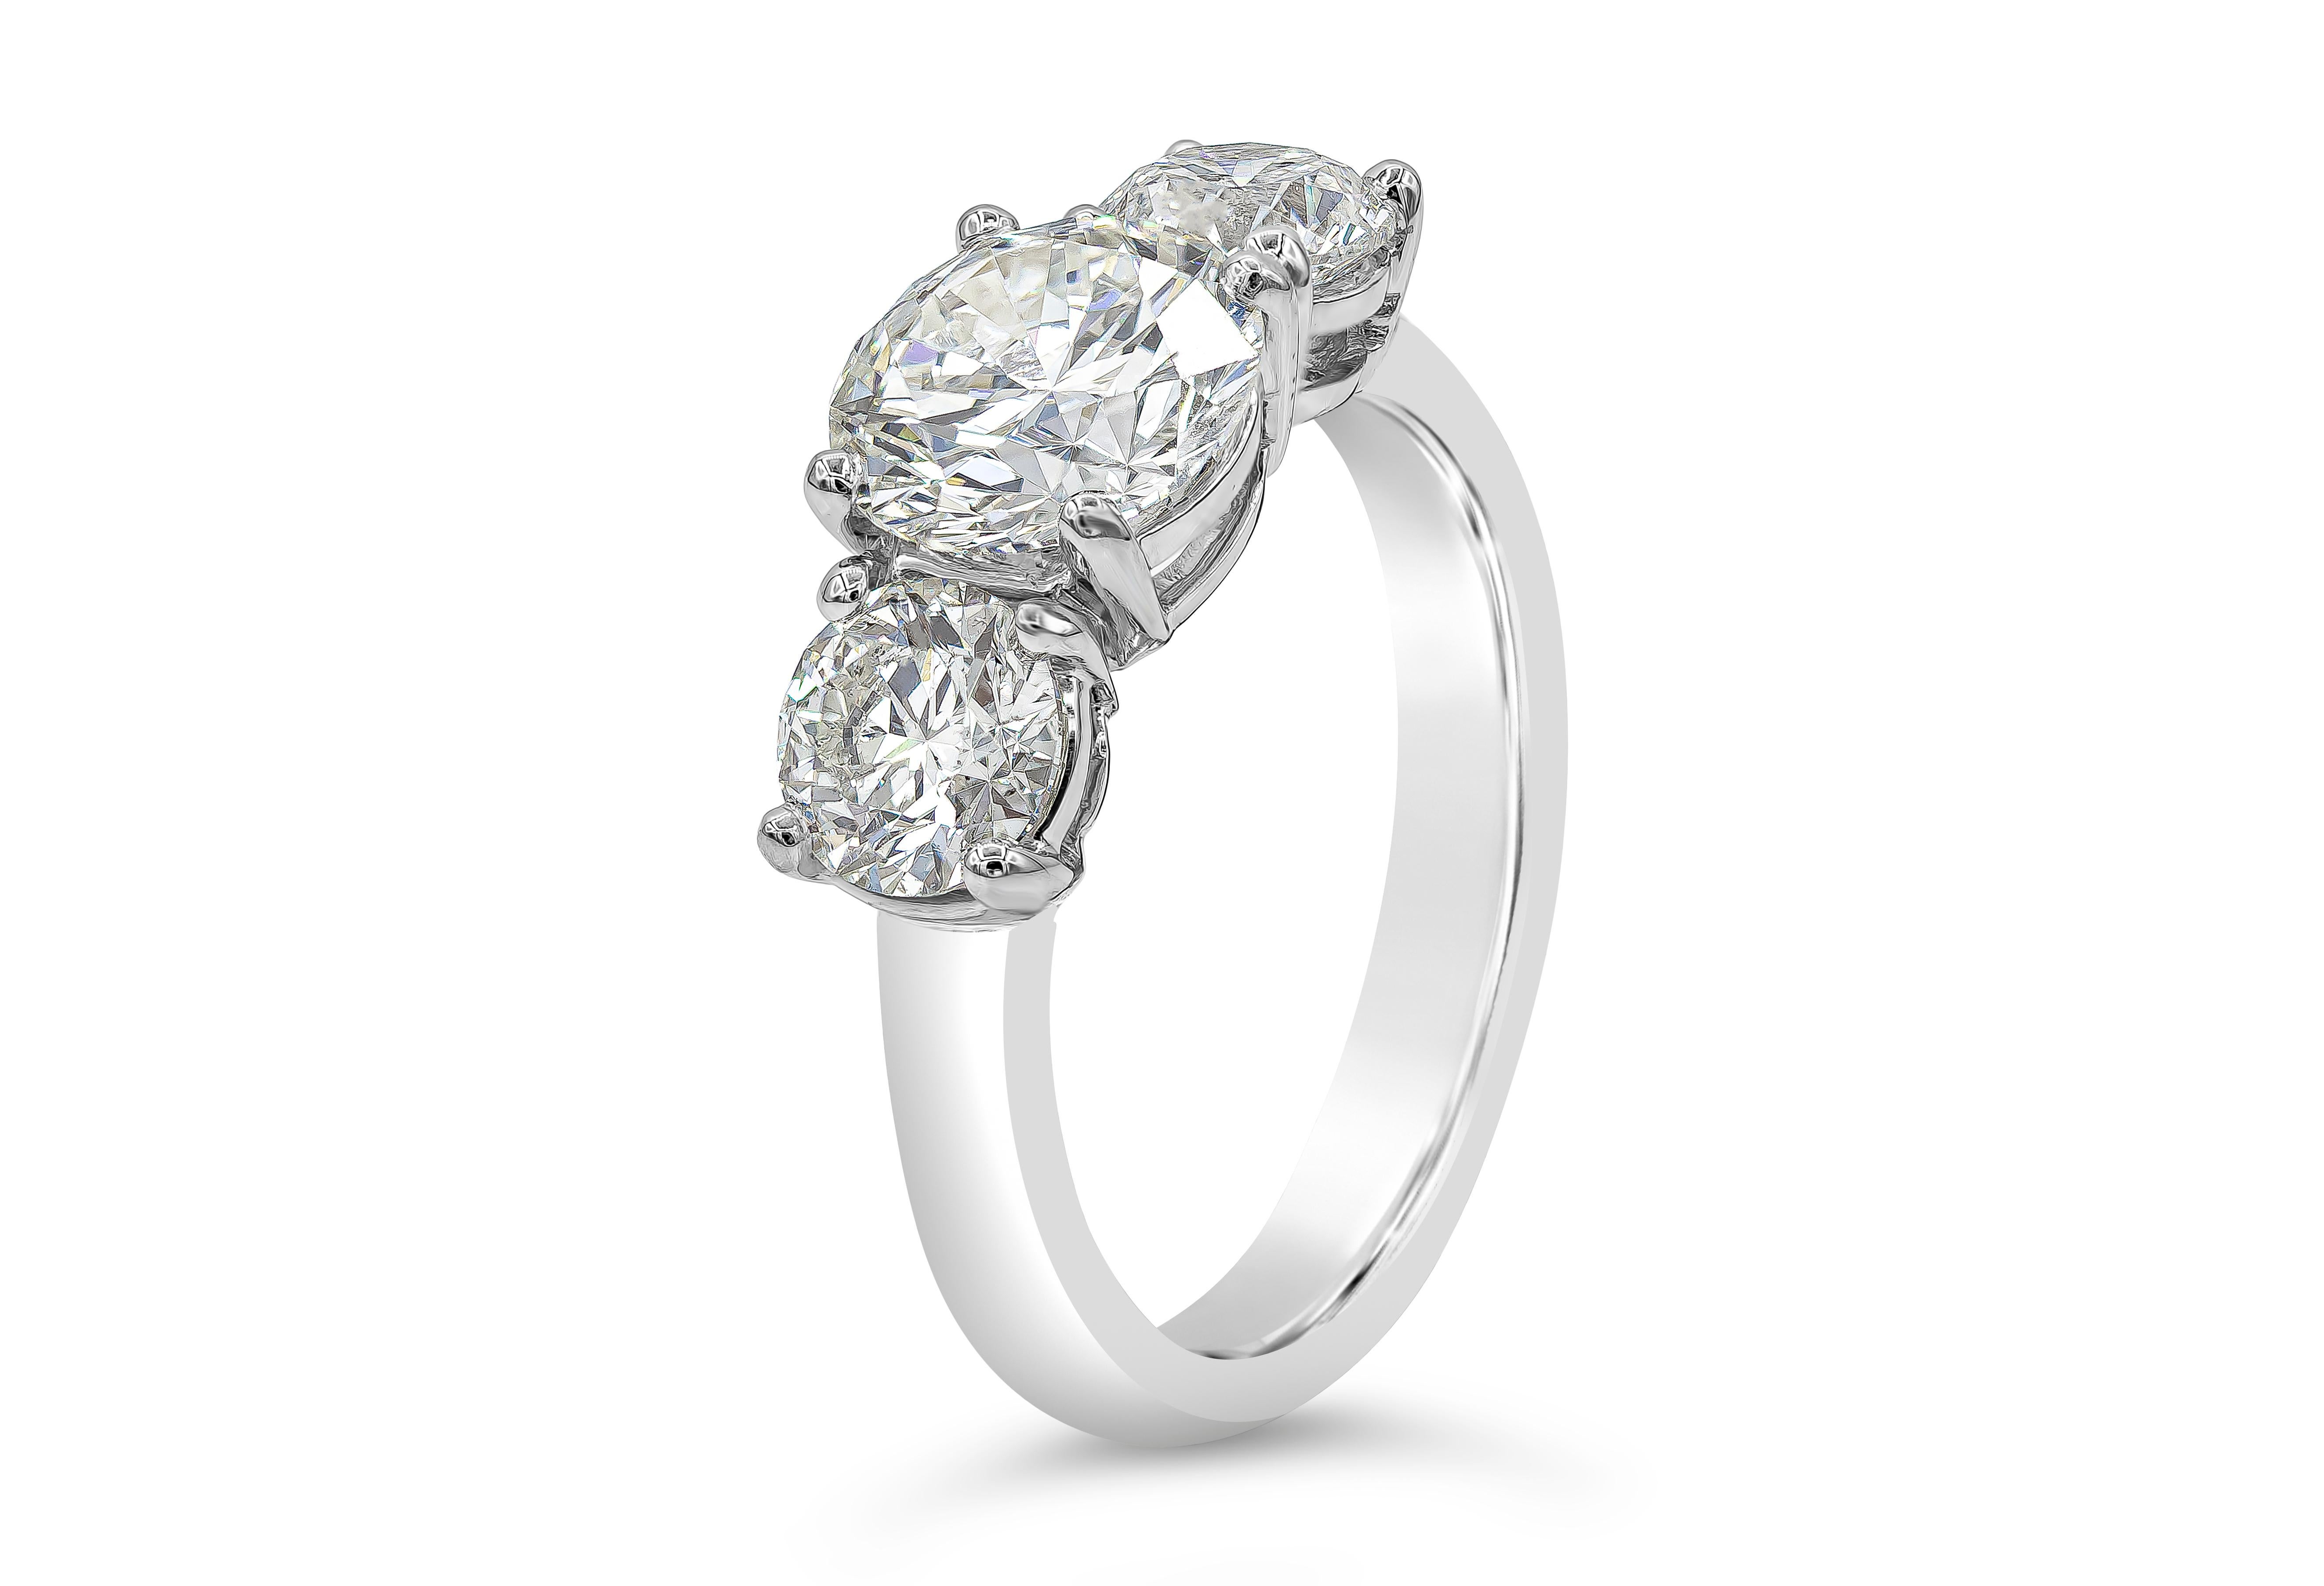 A brilliant engagement ring style showcasing a 1.58 carat round brilliant diamond certified by GIA as H color, I1 clarity. Flanking the center are two smaller round brilliant diamonds weighing 1.18 carats total. Set in an everlasting platinum